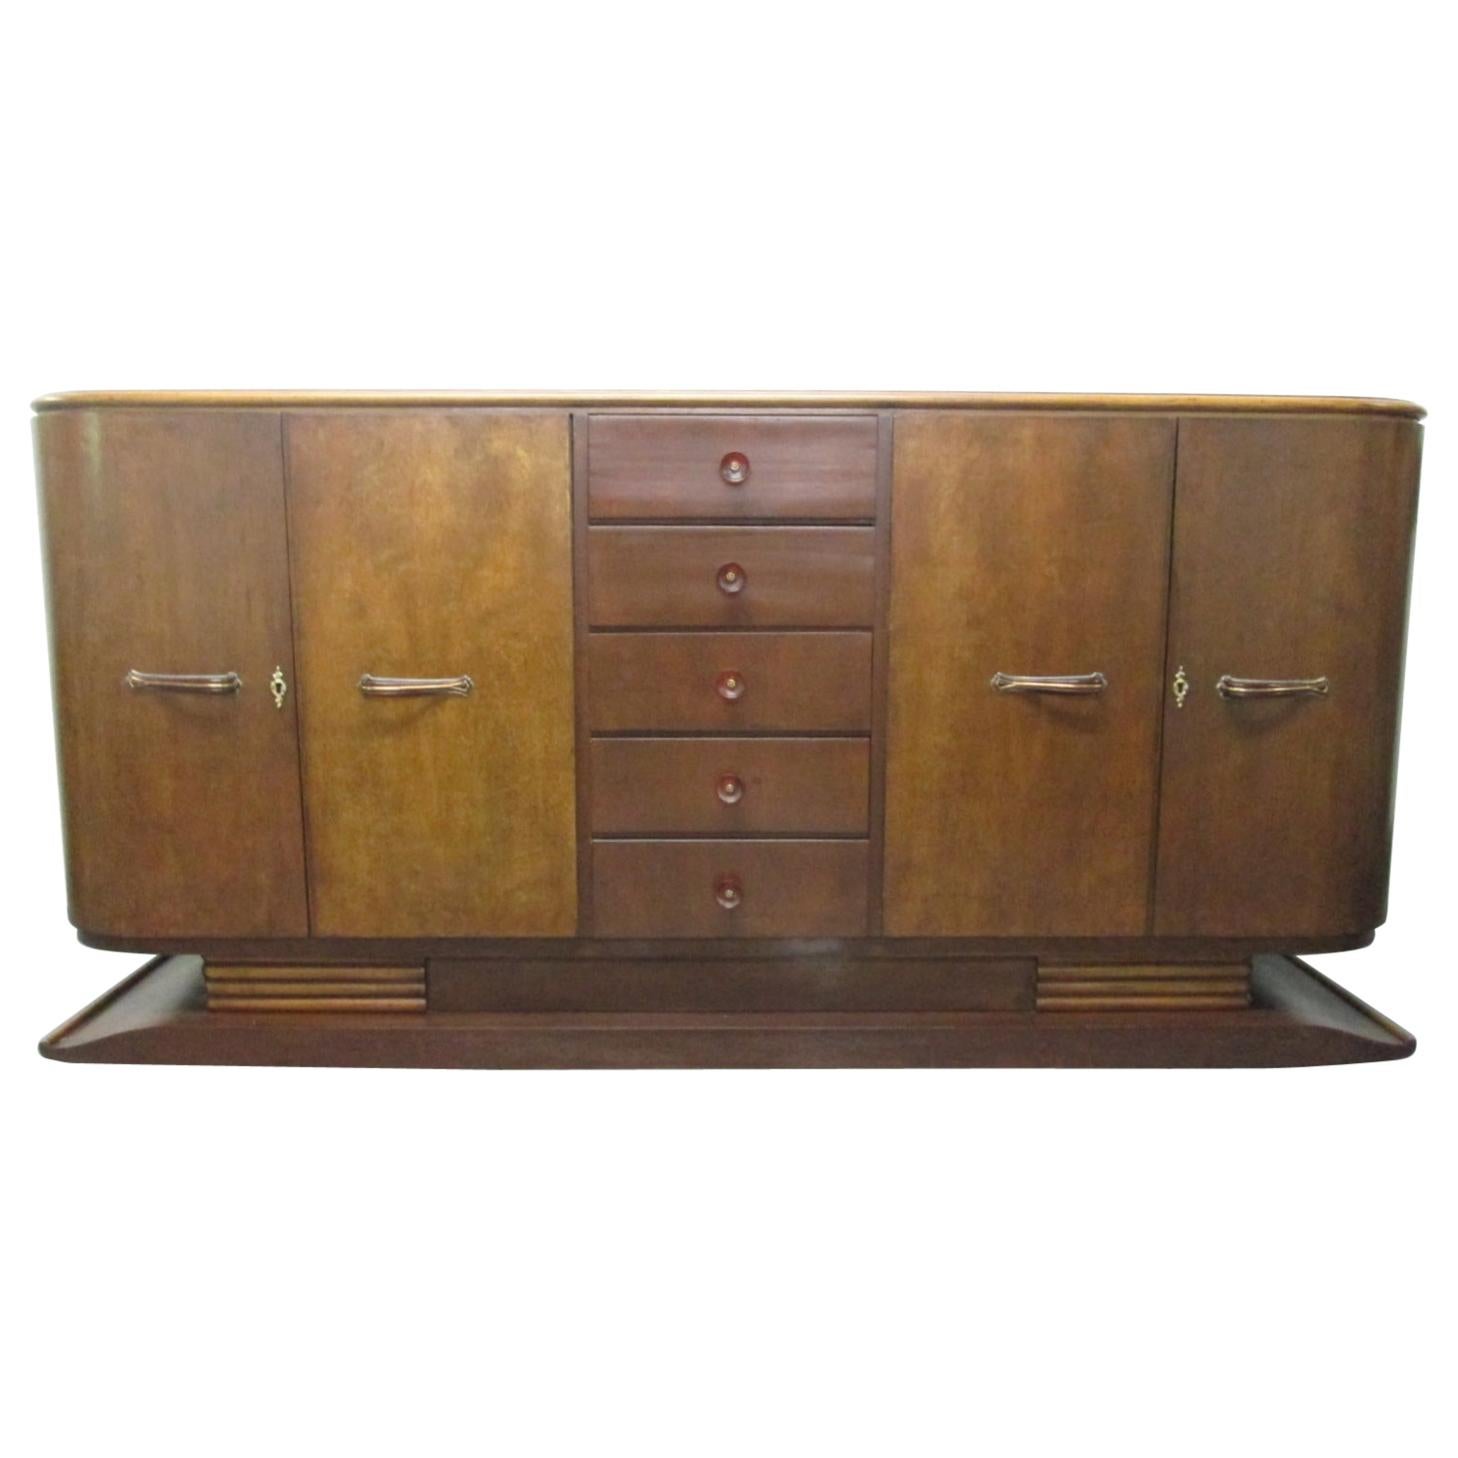 French Art Deco Sideboard or Buffet